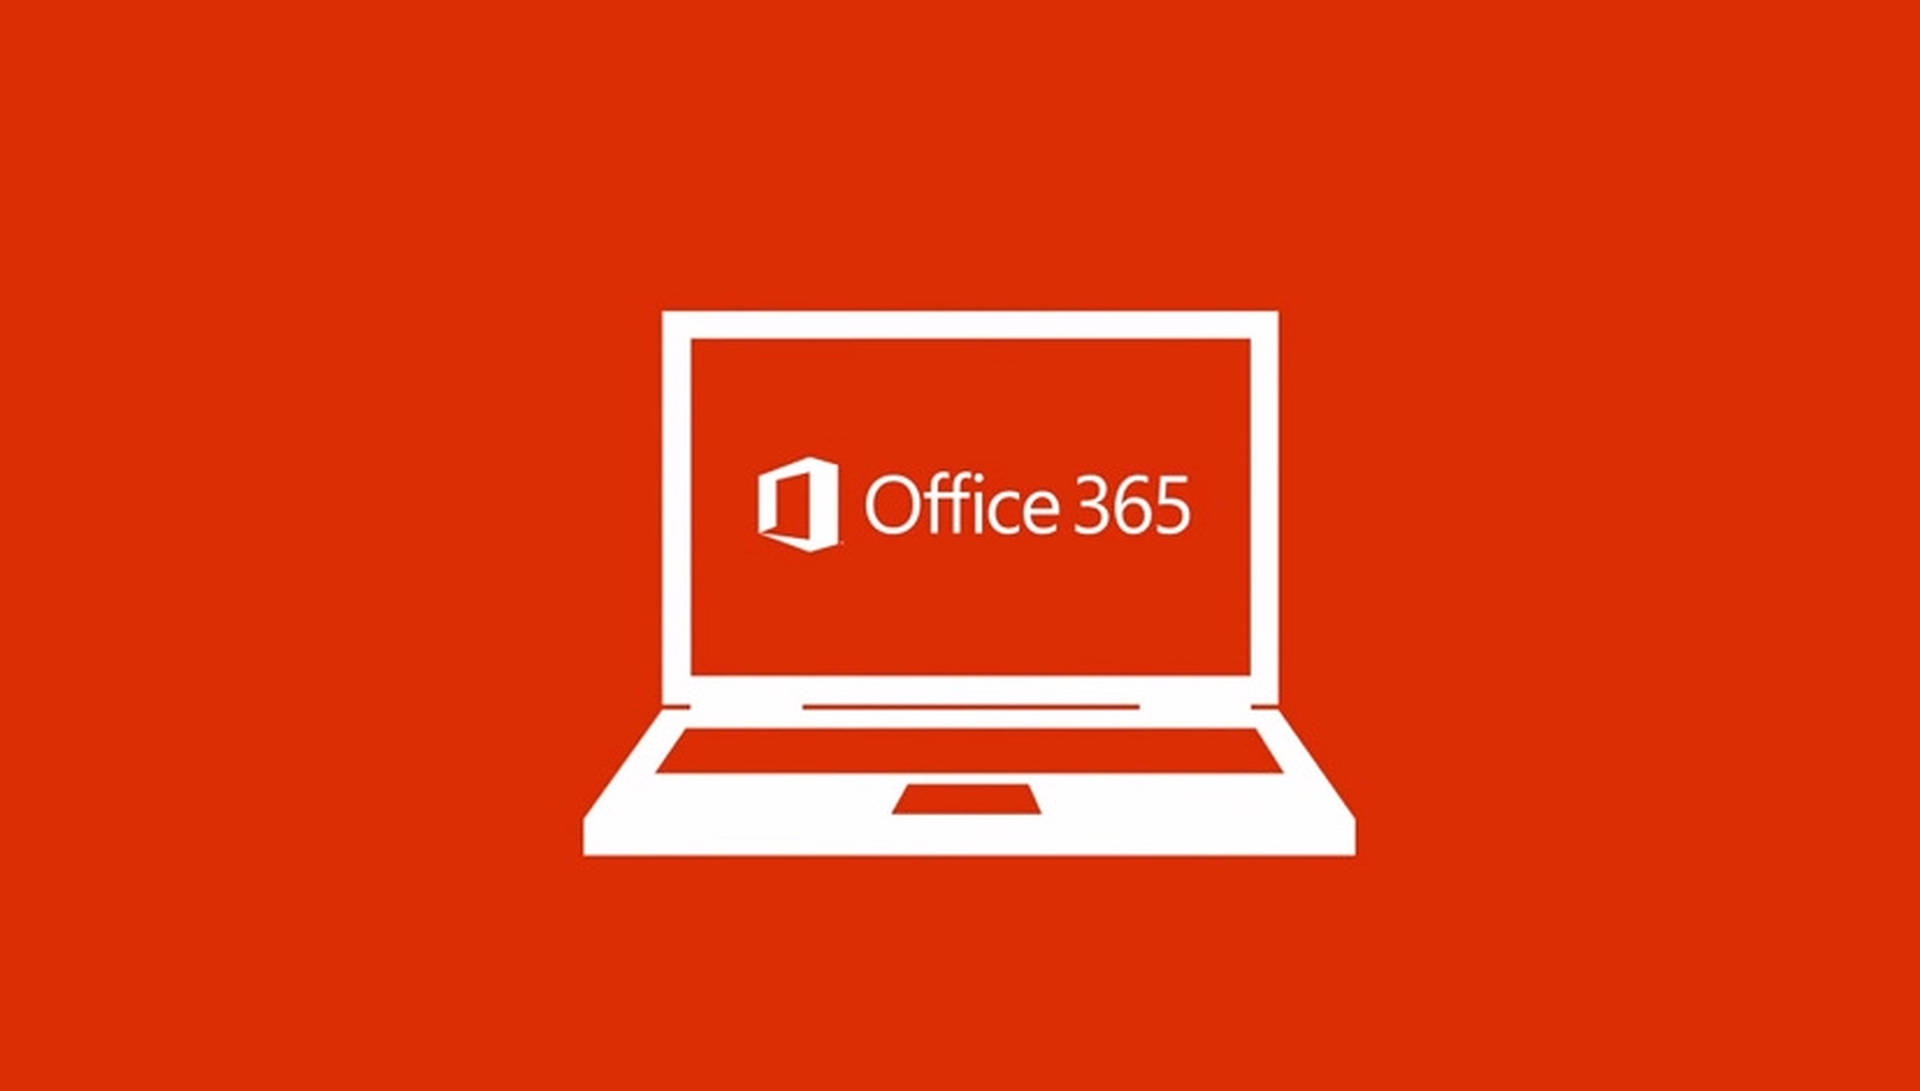 Office 365 Background Photos